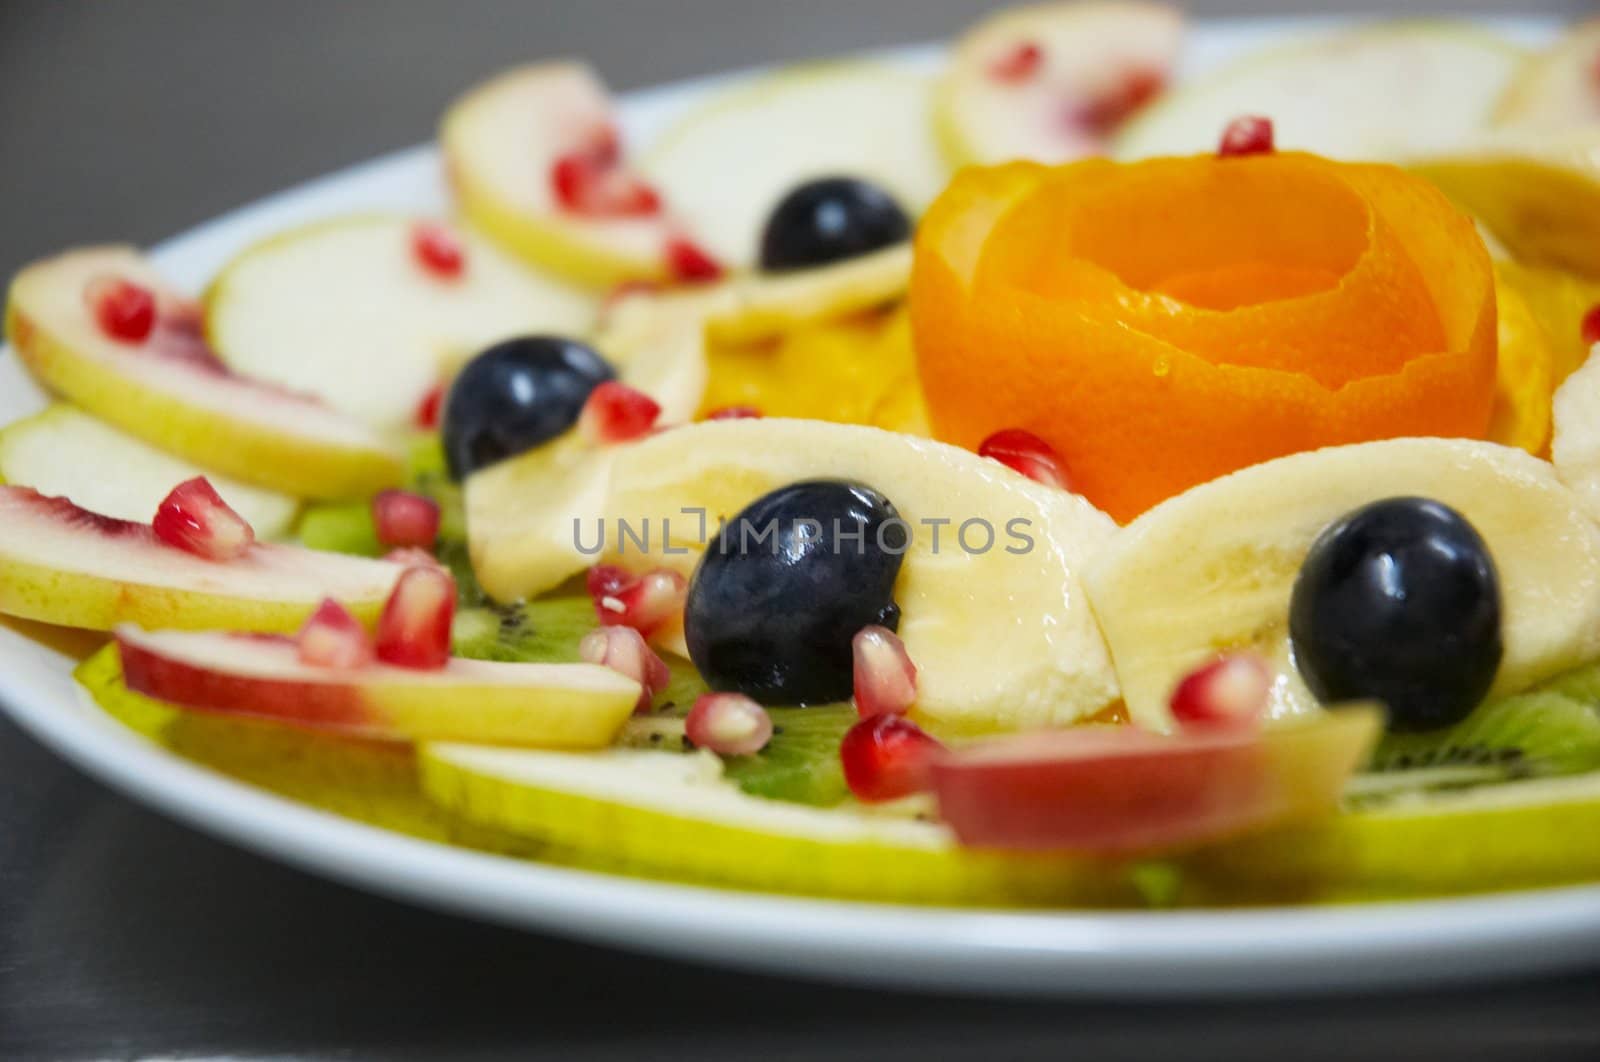 Perfectly designed fresh juicy fruit salad on plate.
Close-up series. Shallow DOF.